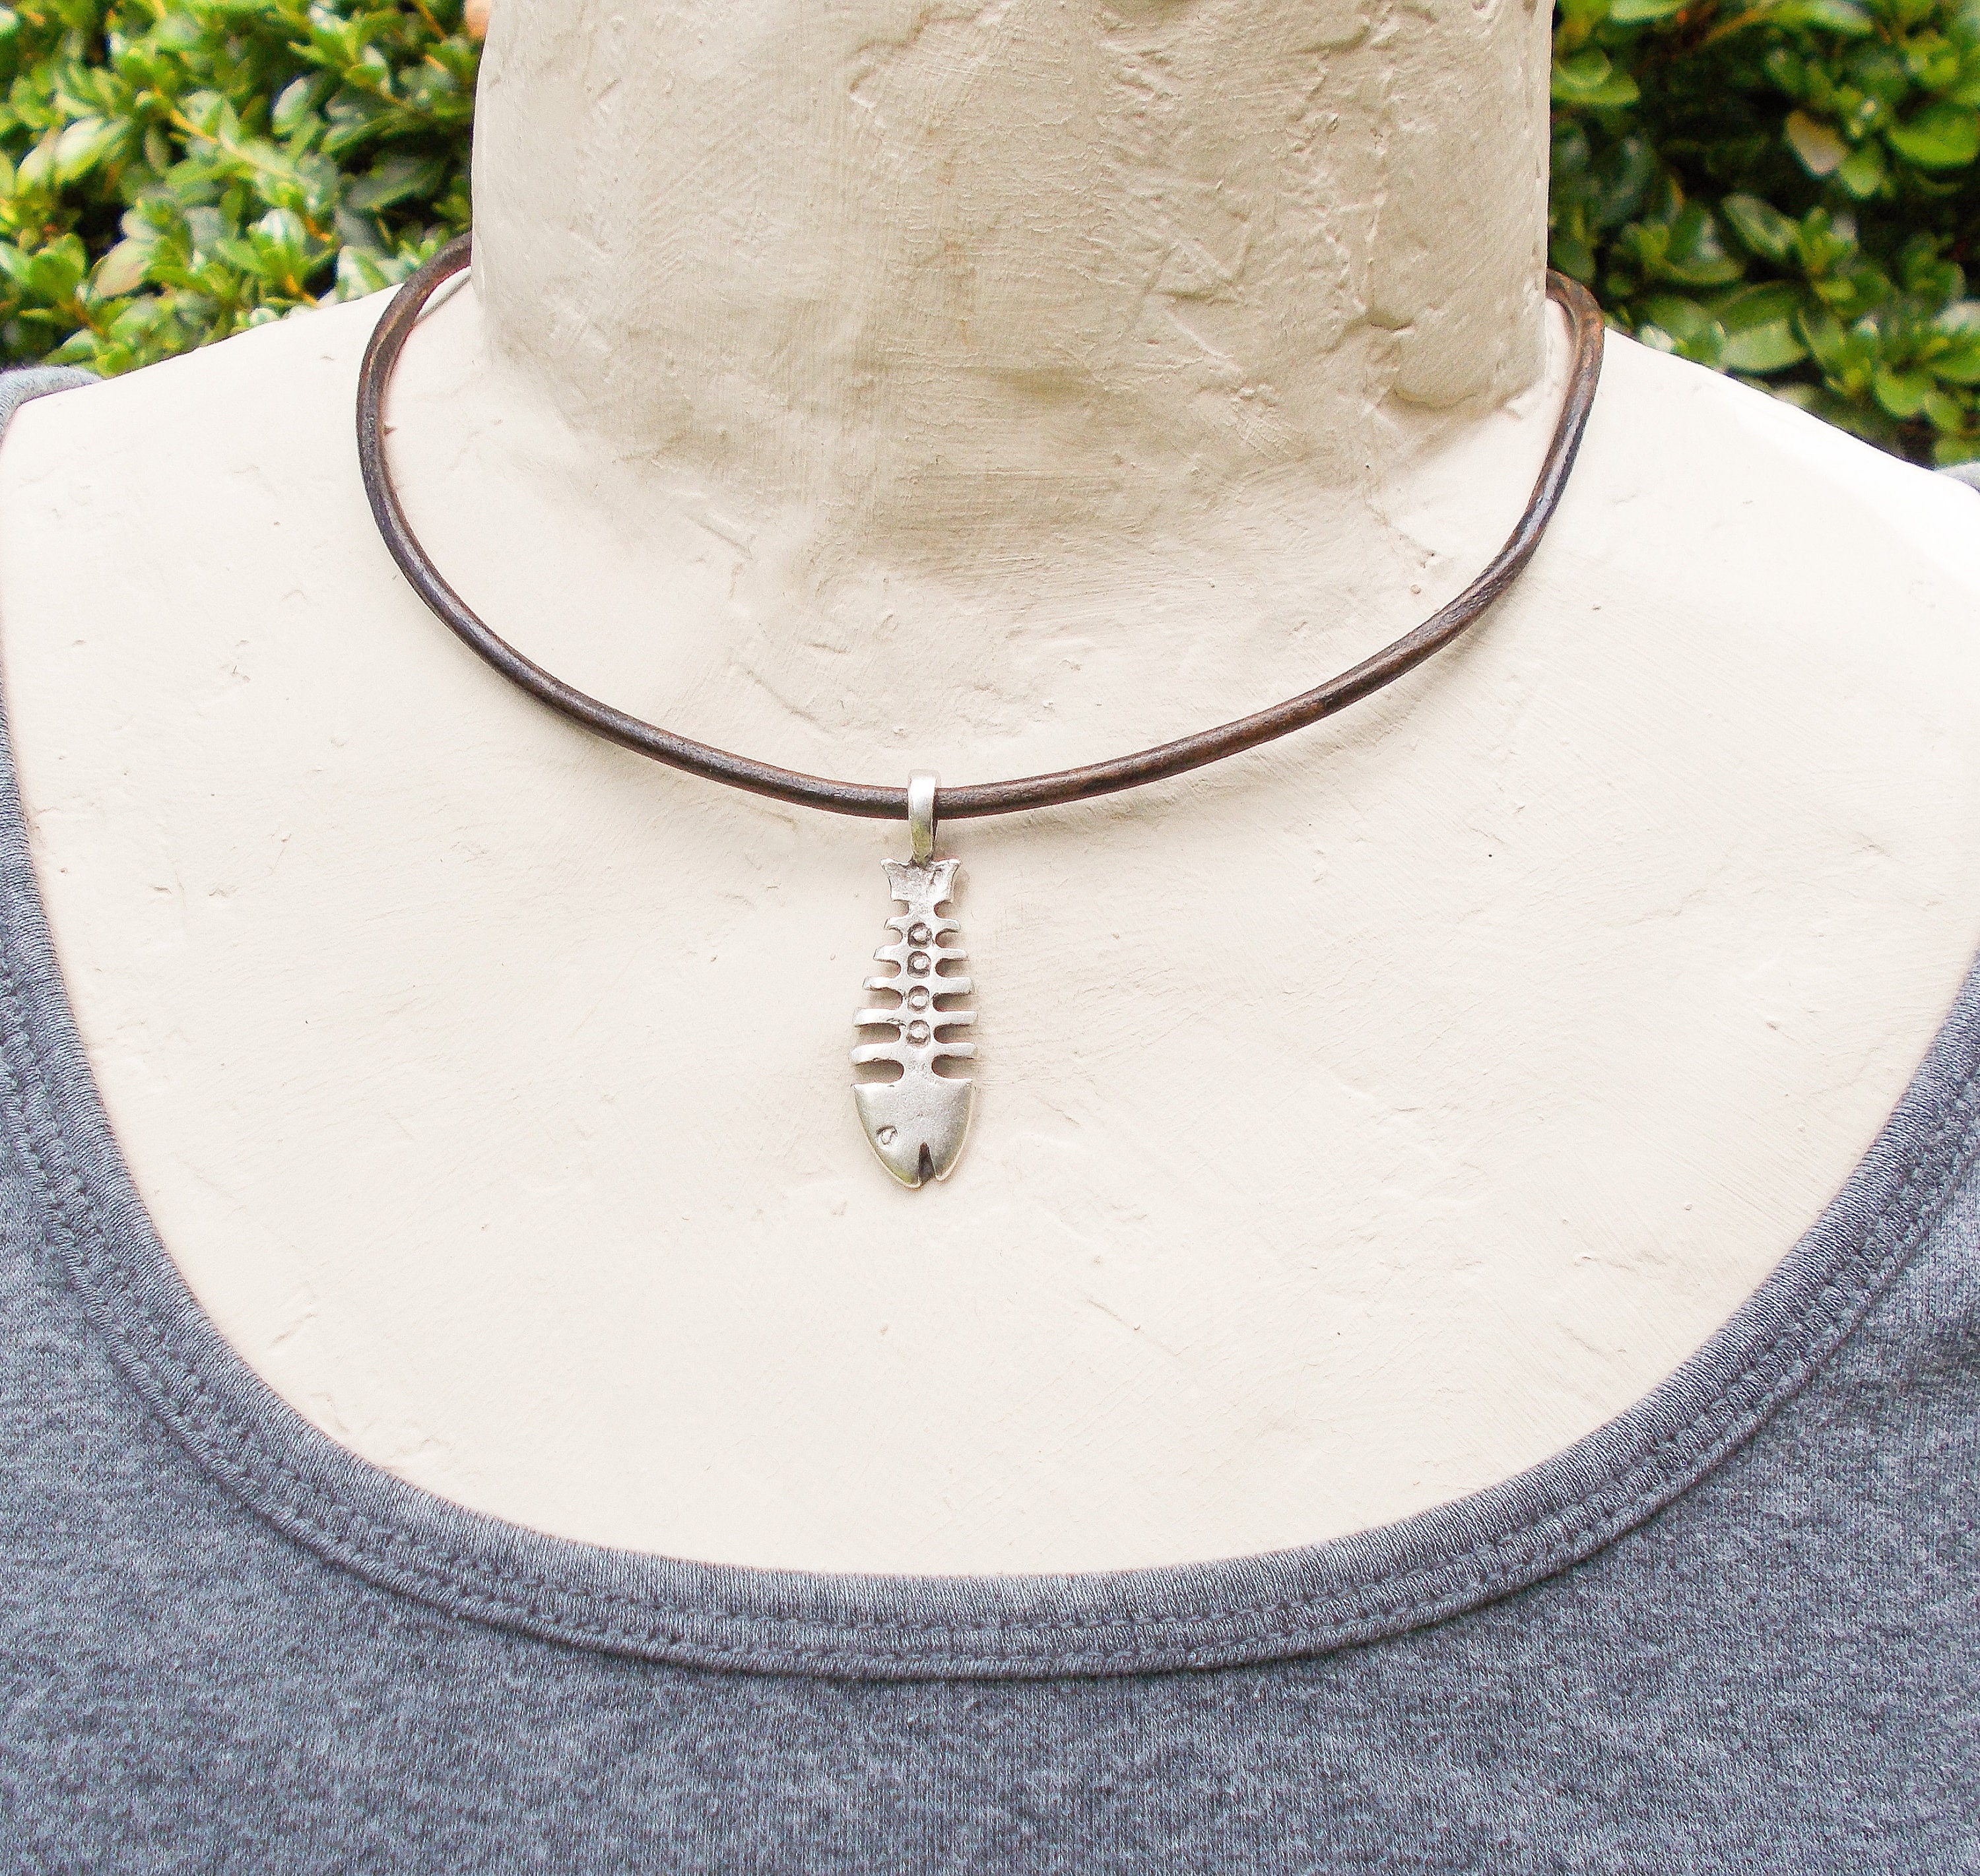 Necklace - string and metal pendant, patinous fish skeleton